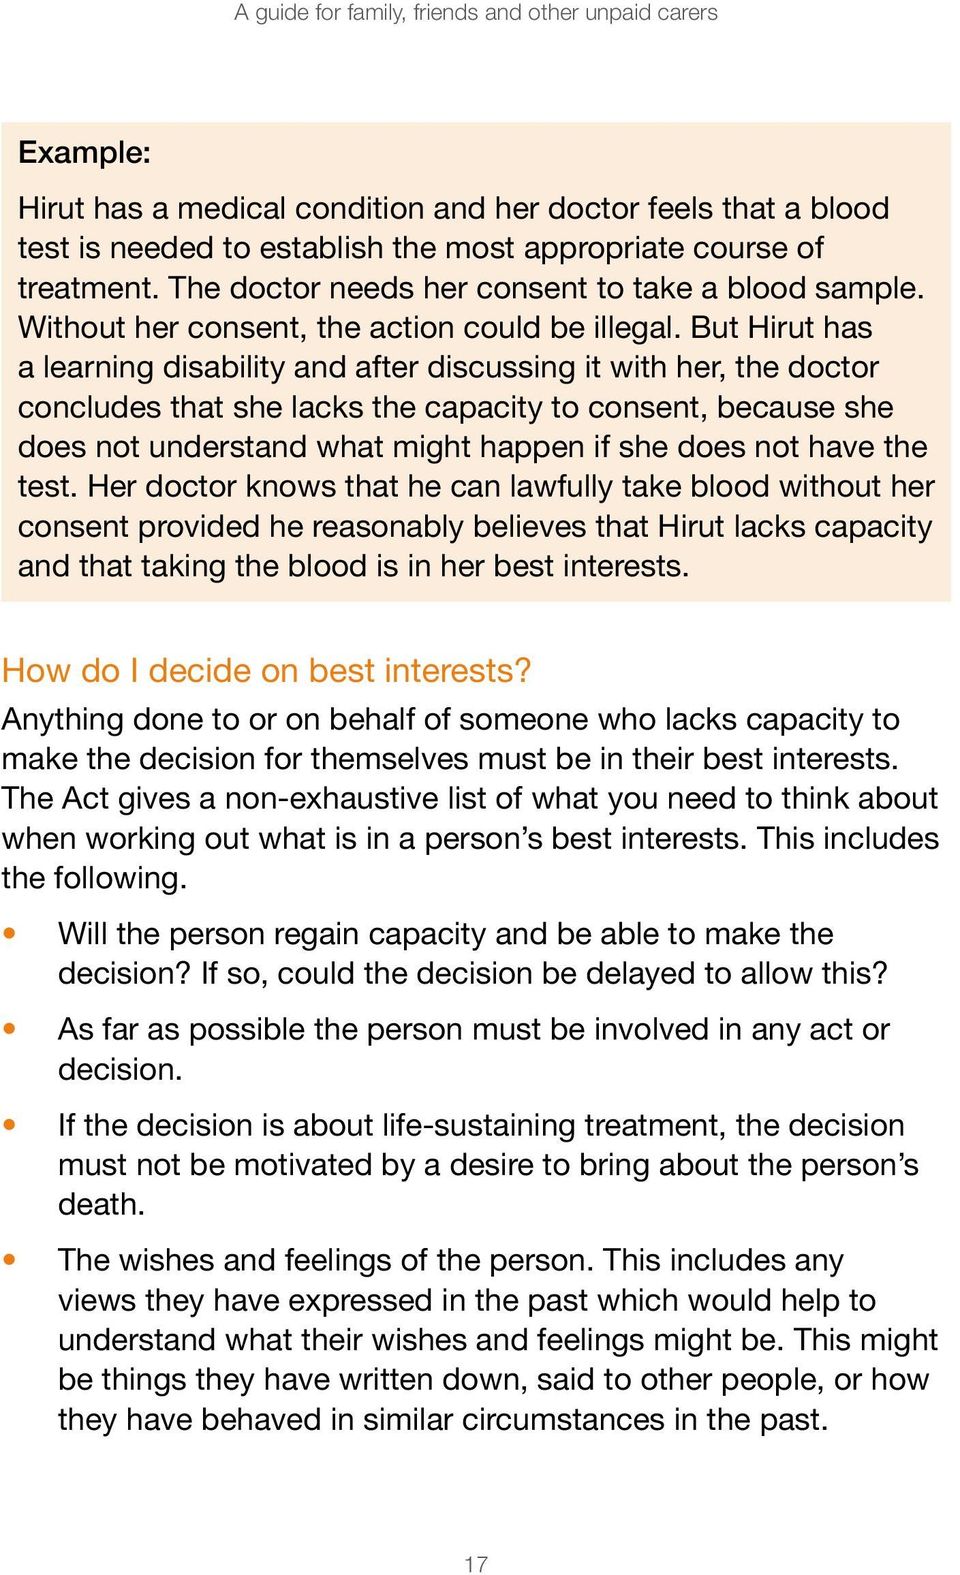 But Hirut has a learning disability and after discussing it with her, the doctor concludes that she lacks the capacity to consent, because she does not understand what might happen if she does not